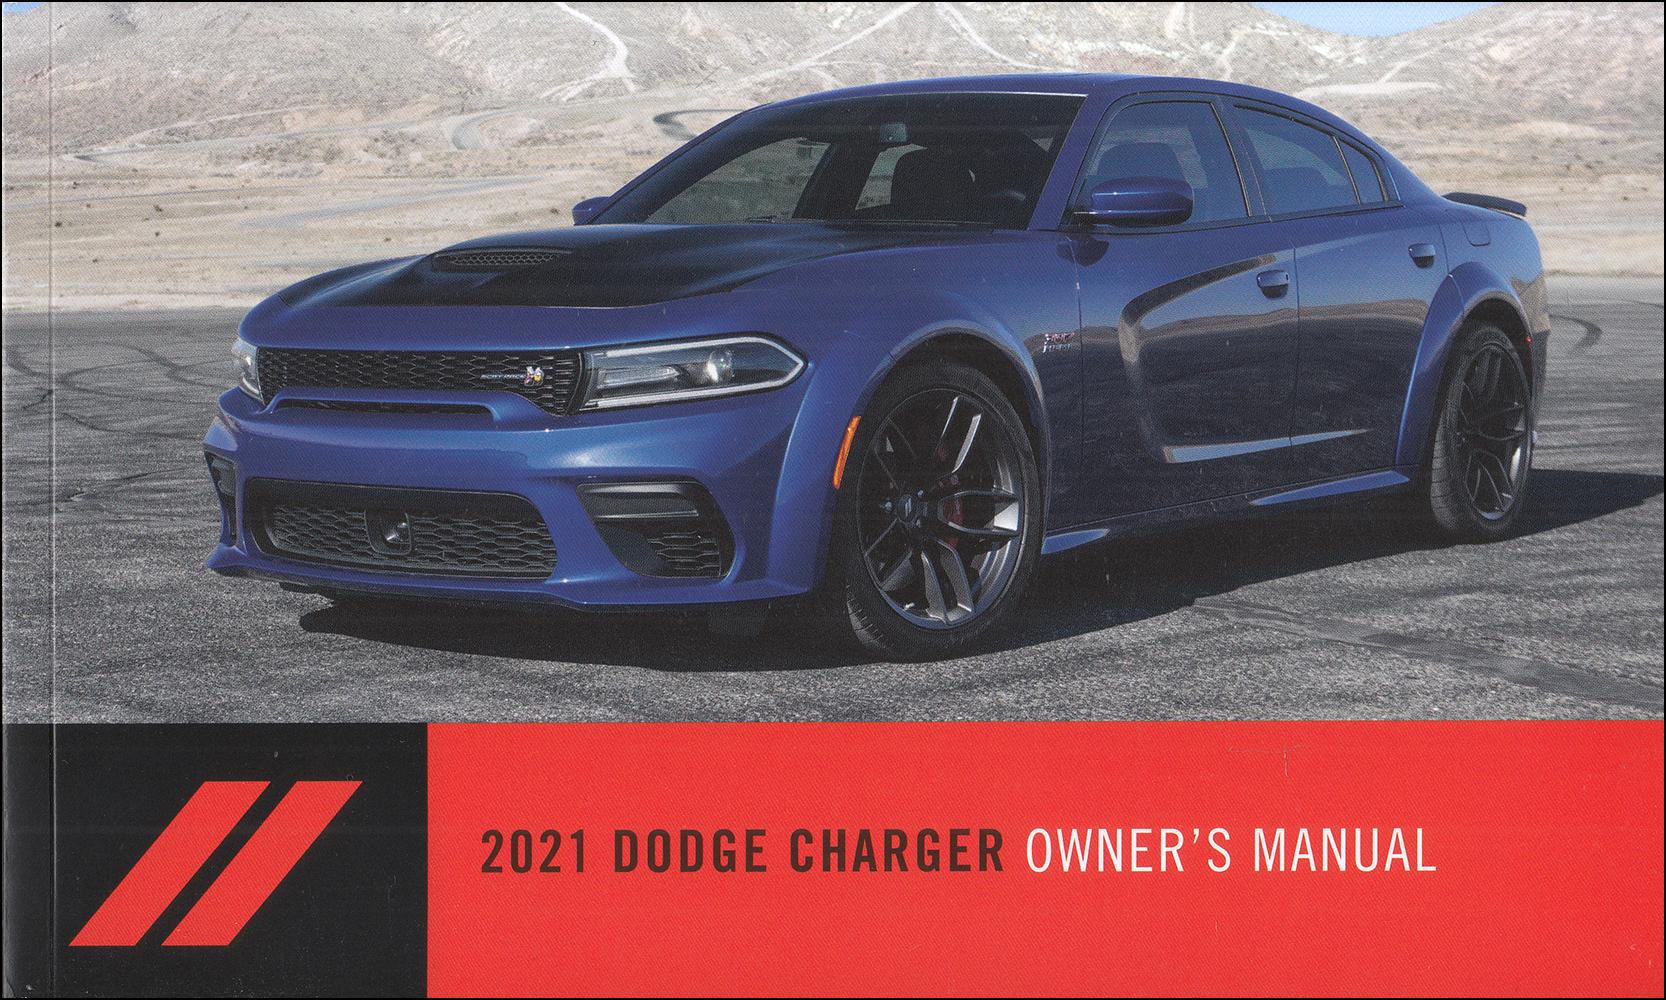 2021 Dodge Charger Owner's Manual with Case and Pamphlets Original